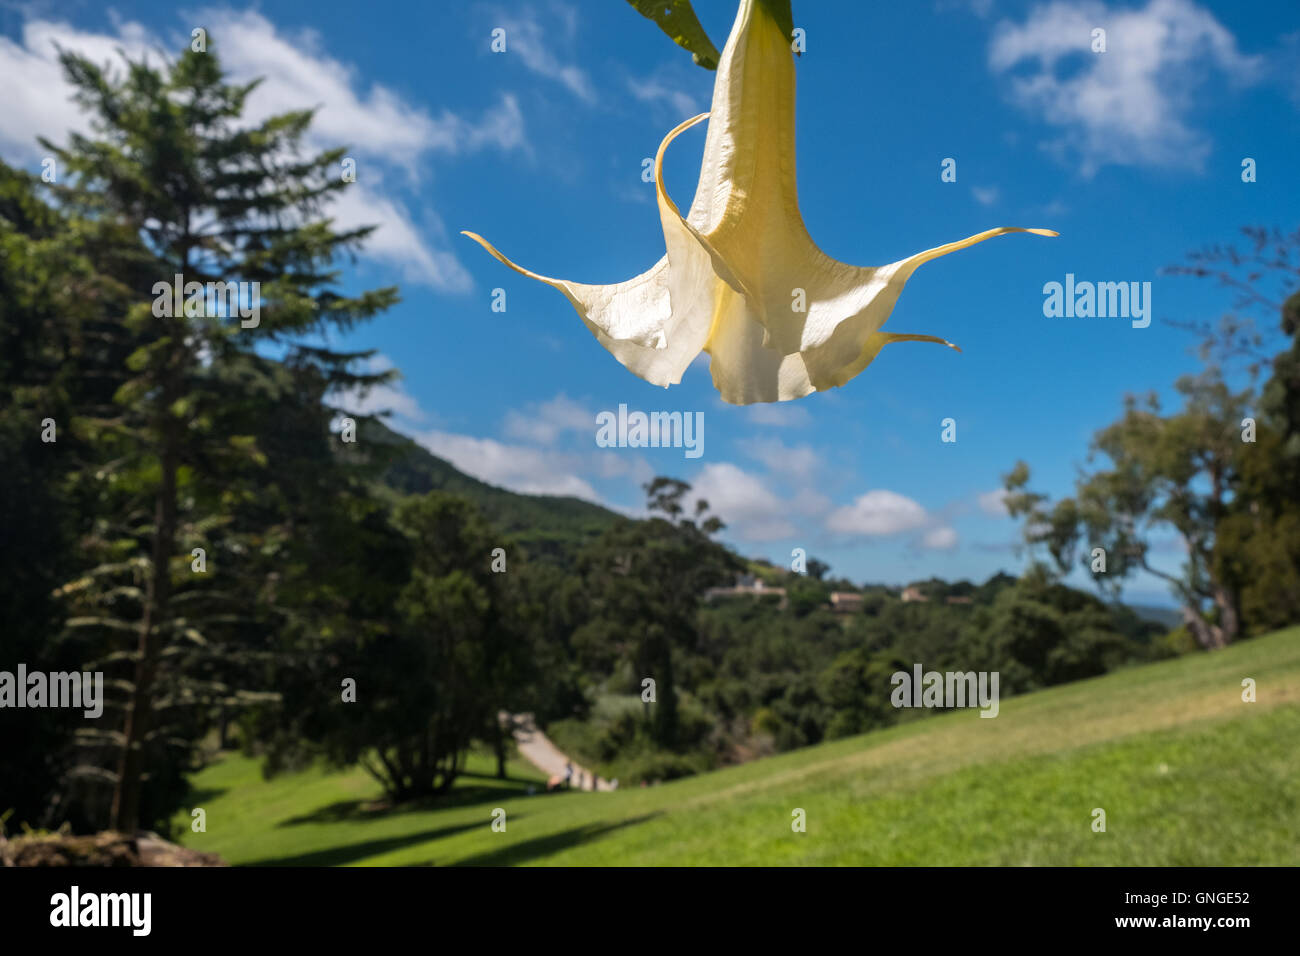 A lilly flower hangs in the gardens of  Monserrate Palace, Sintra, Portugal Stock Photo